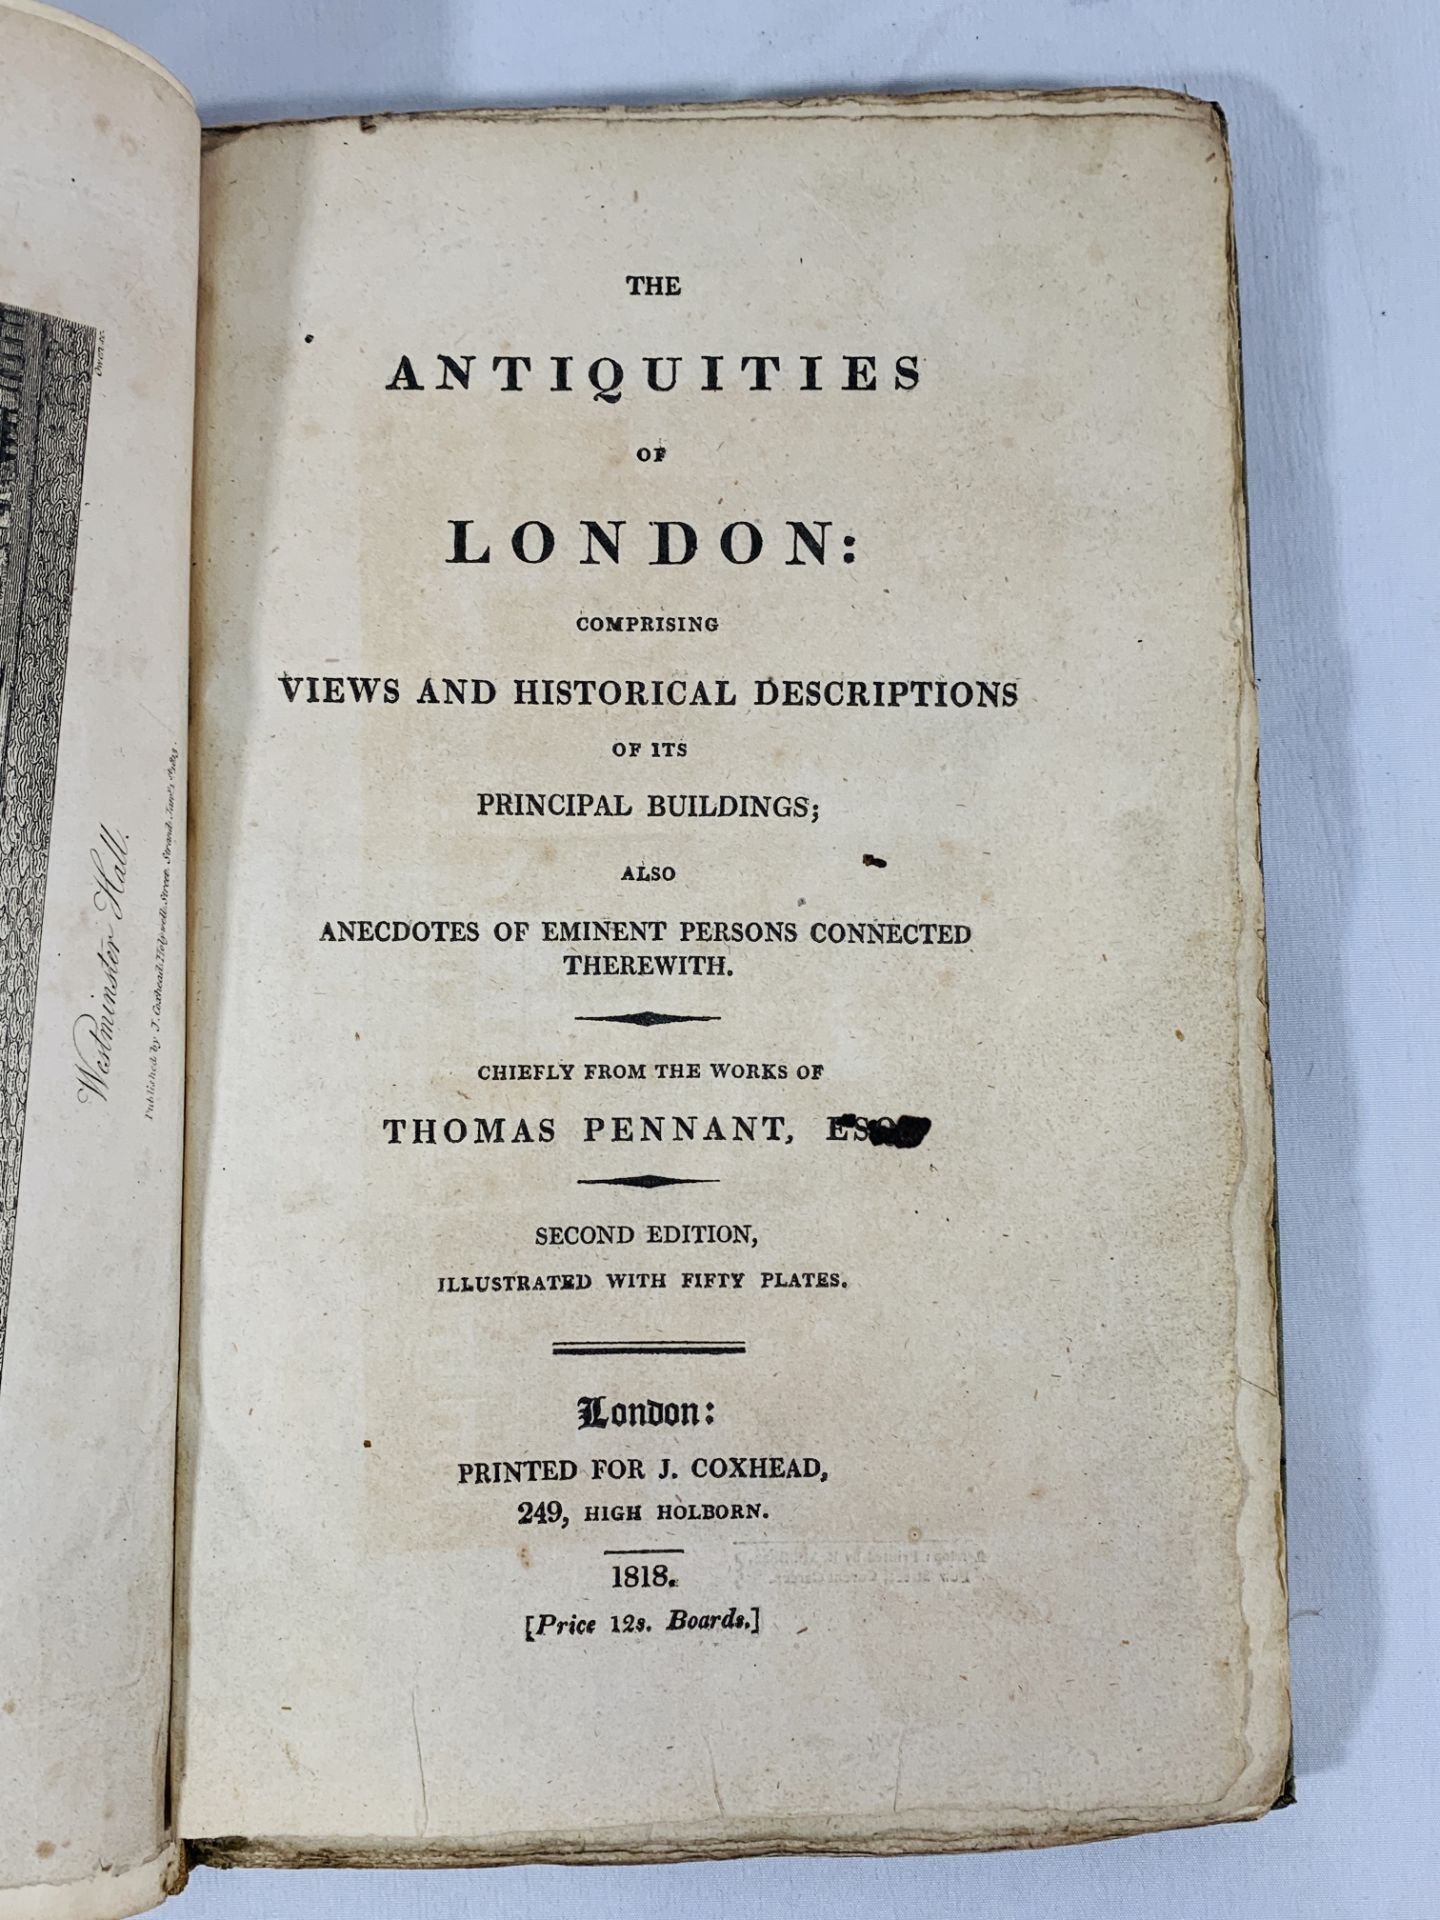 Two copies of The Antiquities of London from the works of Thomas Pennant - Image 5 of 6